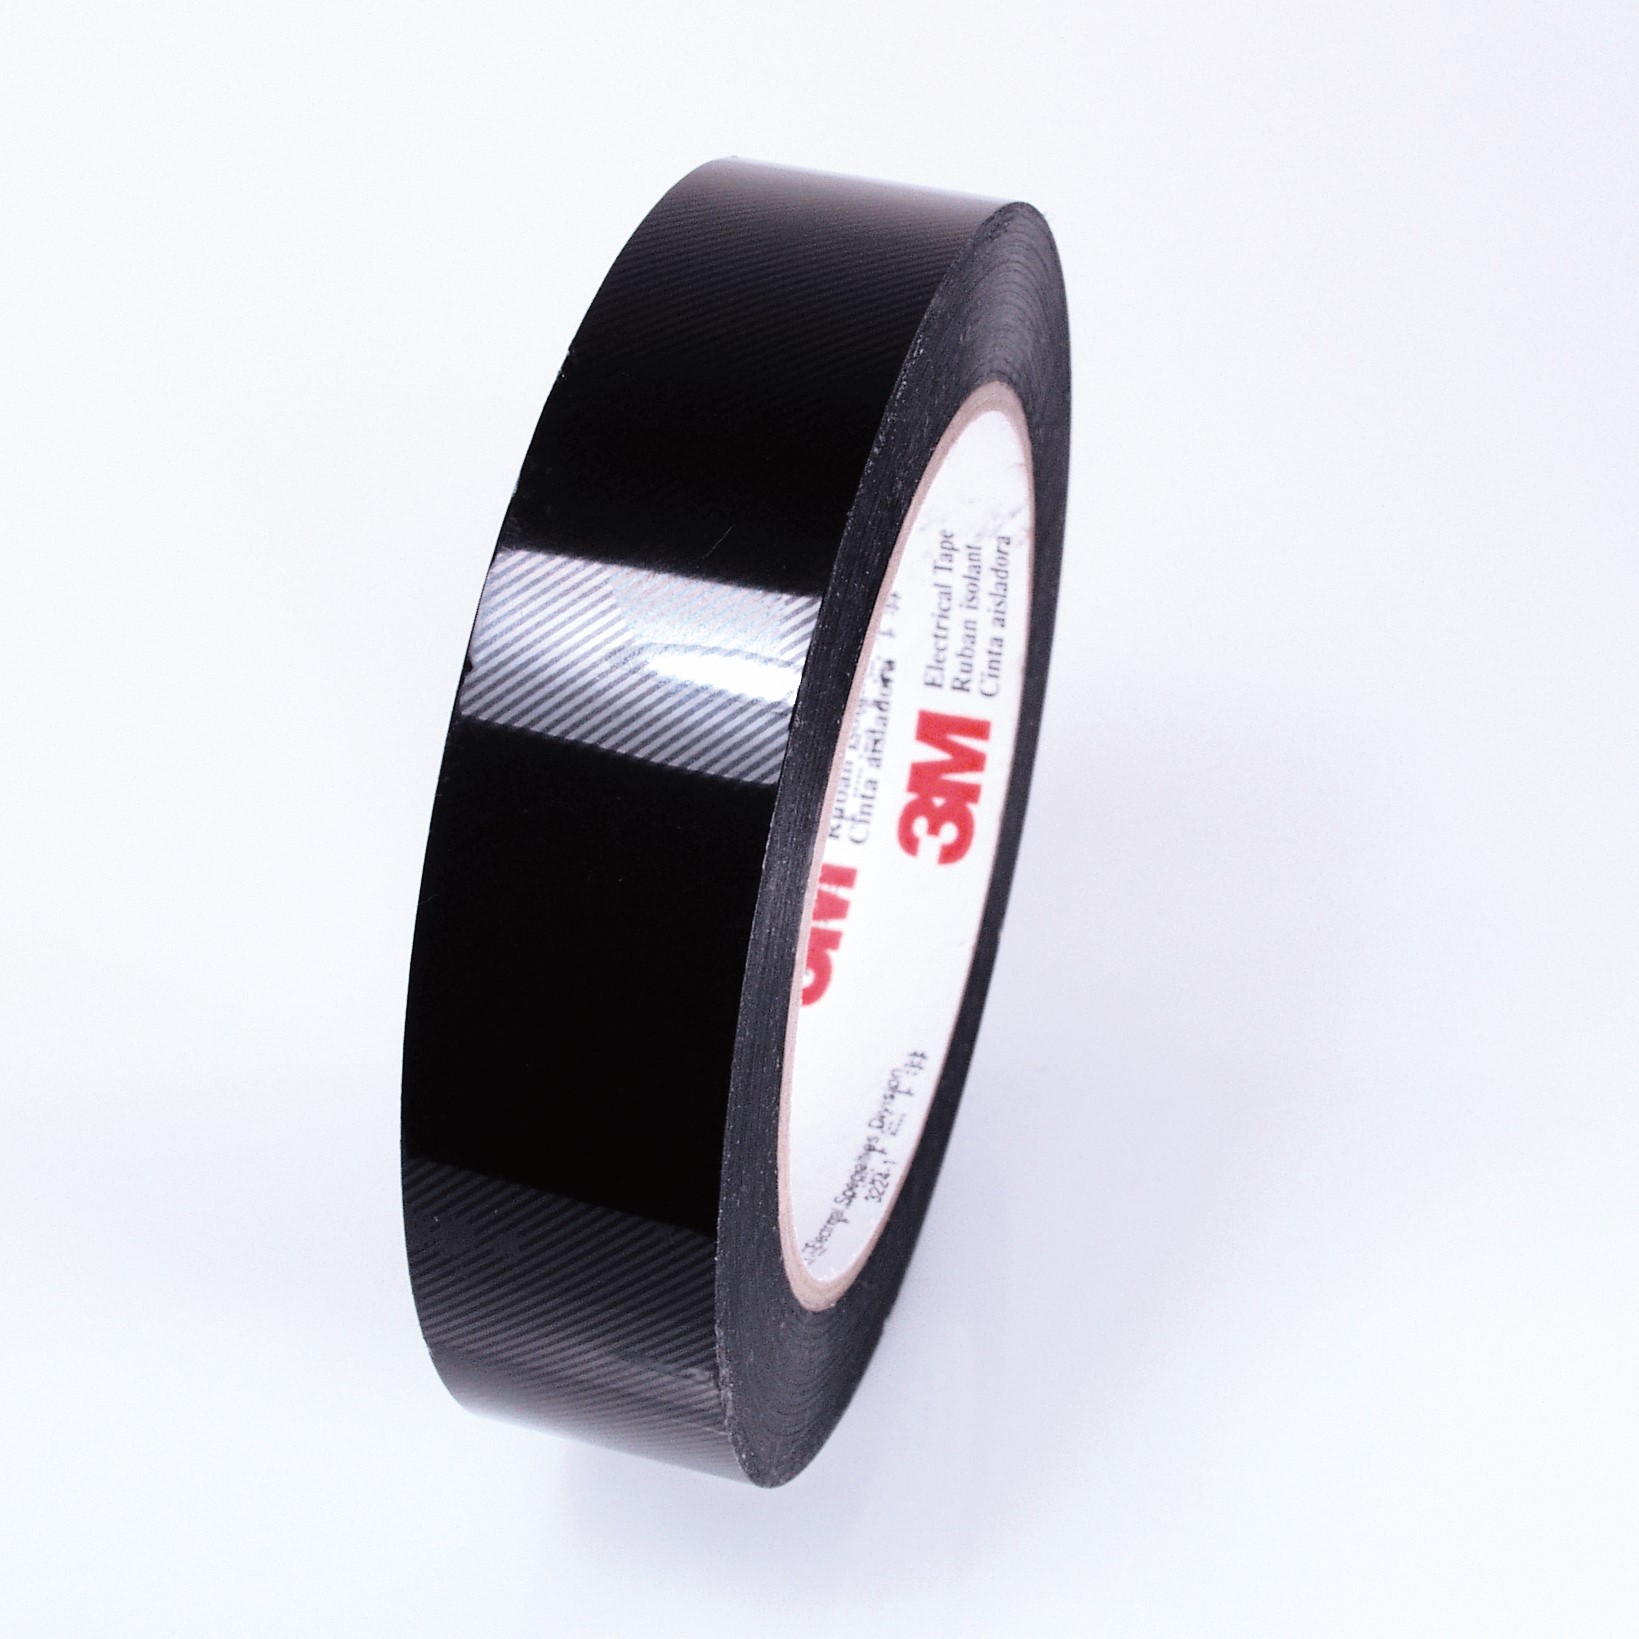 3M ™ PTFE Film Electrical Tape 61 is a PTFE film backed electrical tape. 